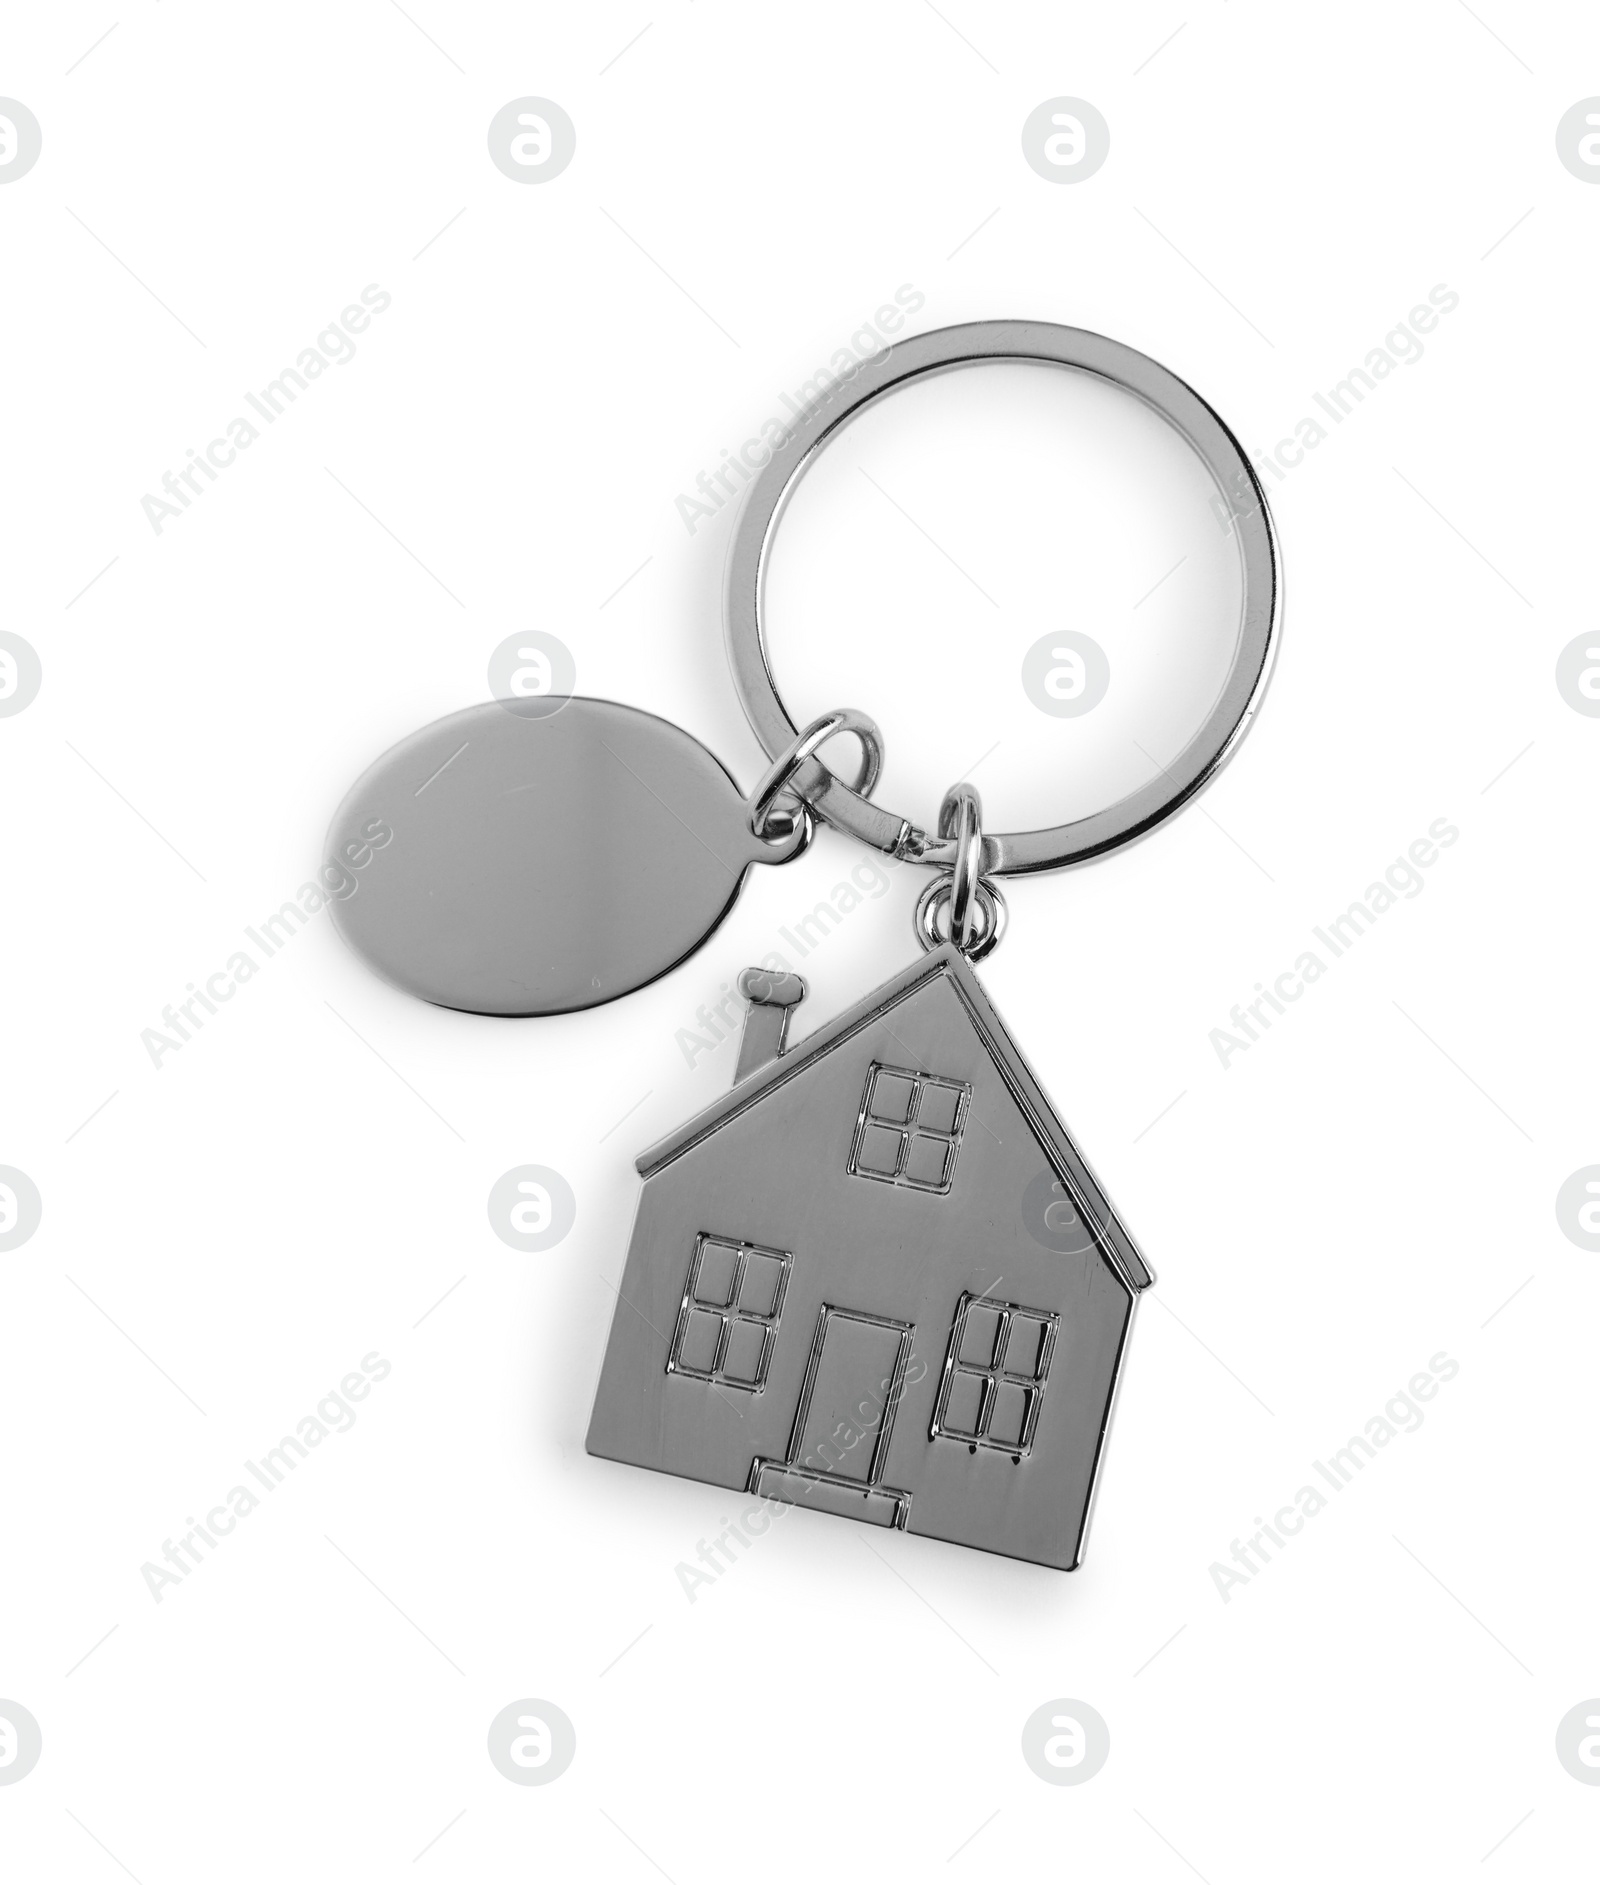 Photo of Metallic keychains with key ring isolated on white, top view